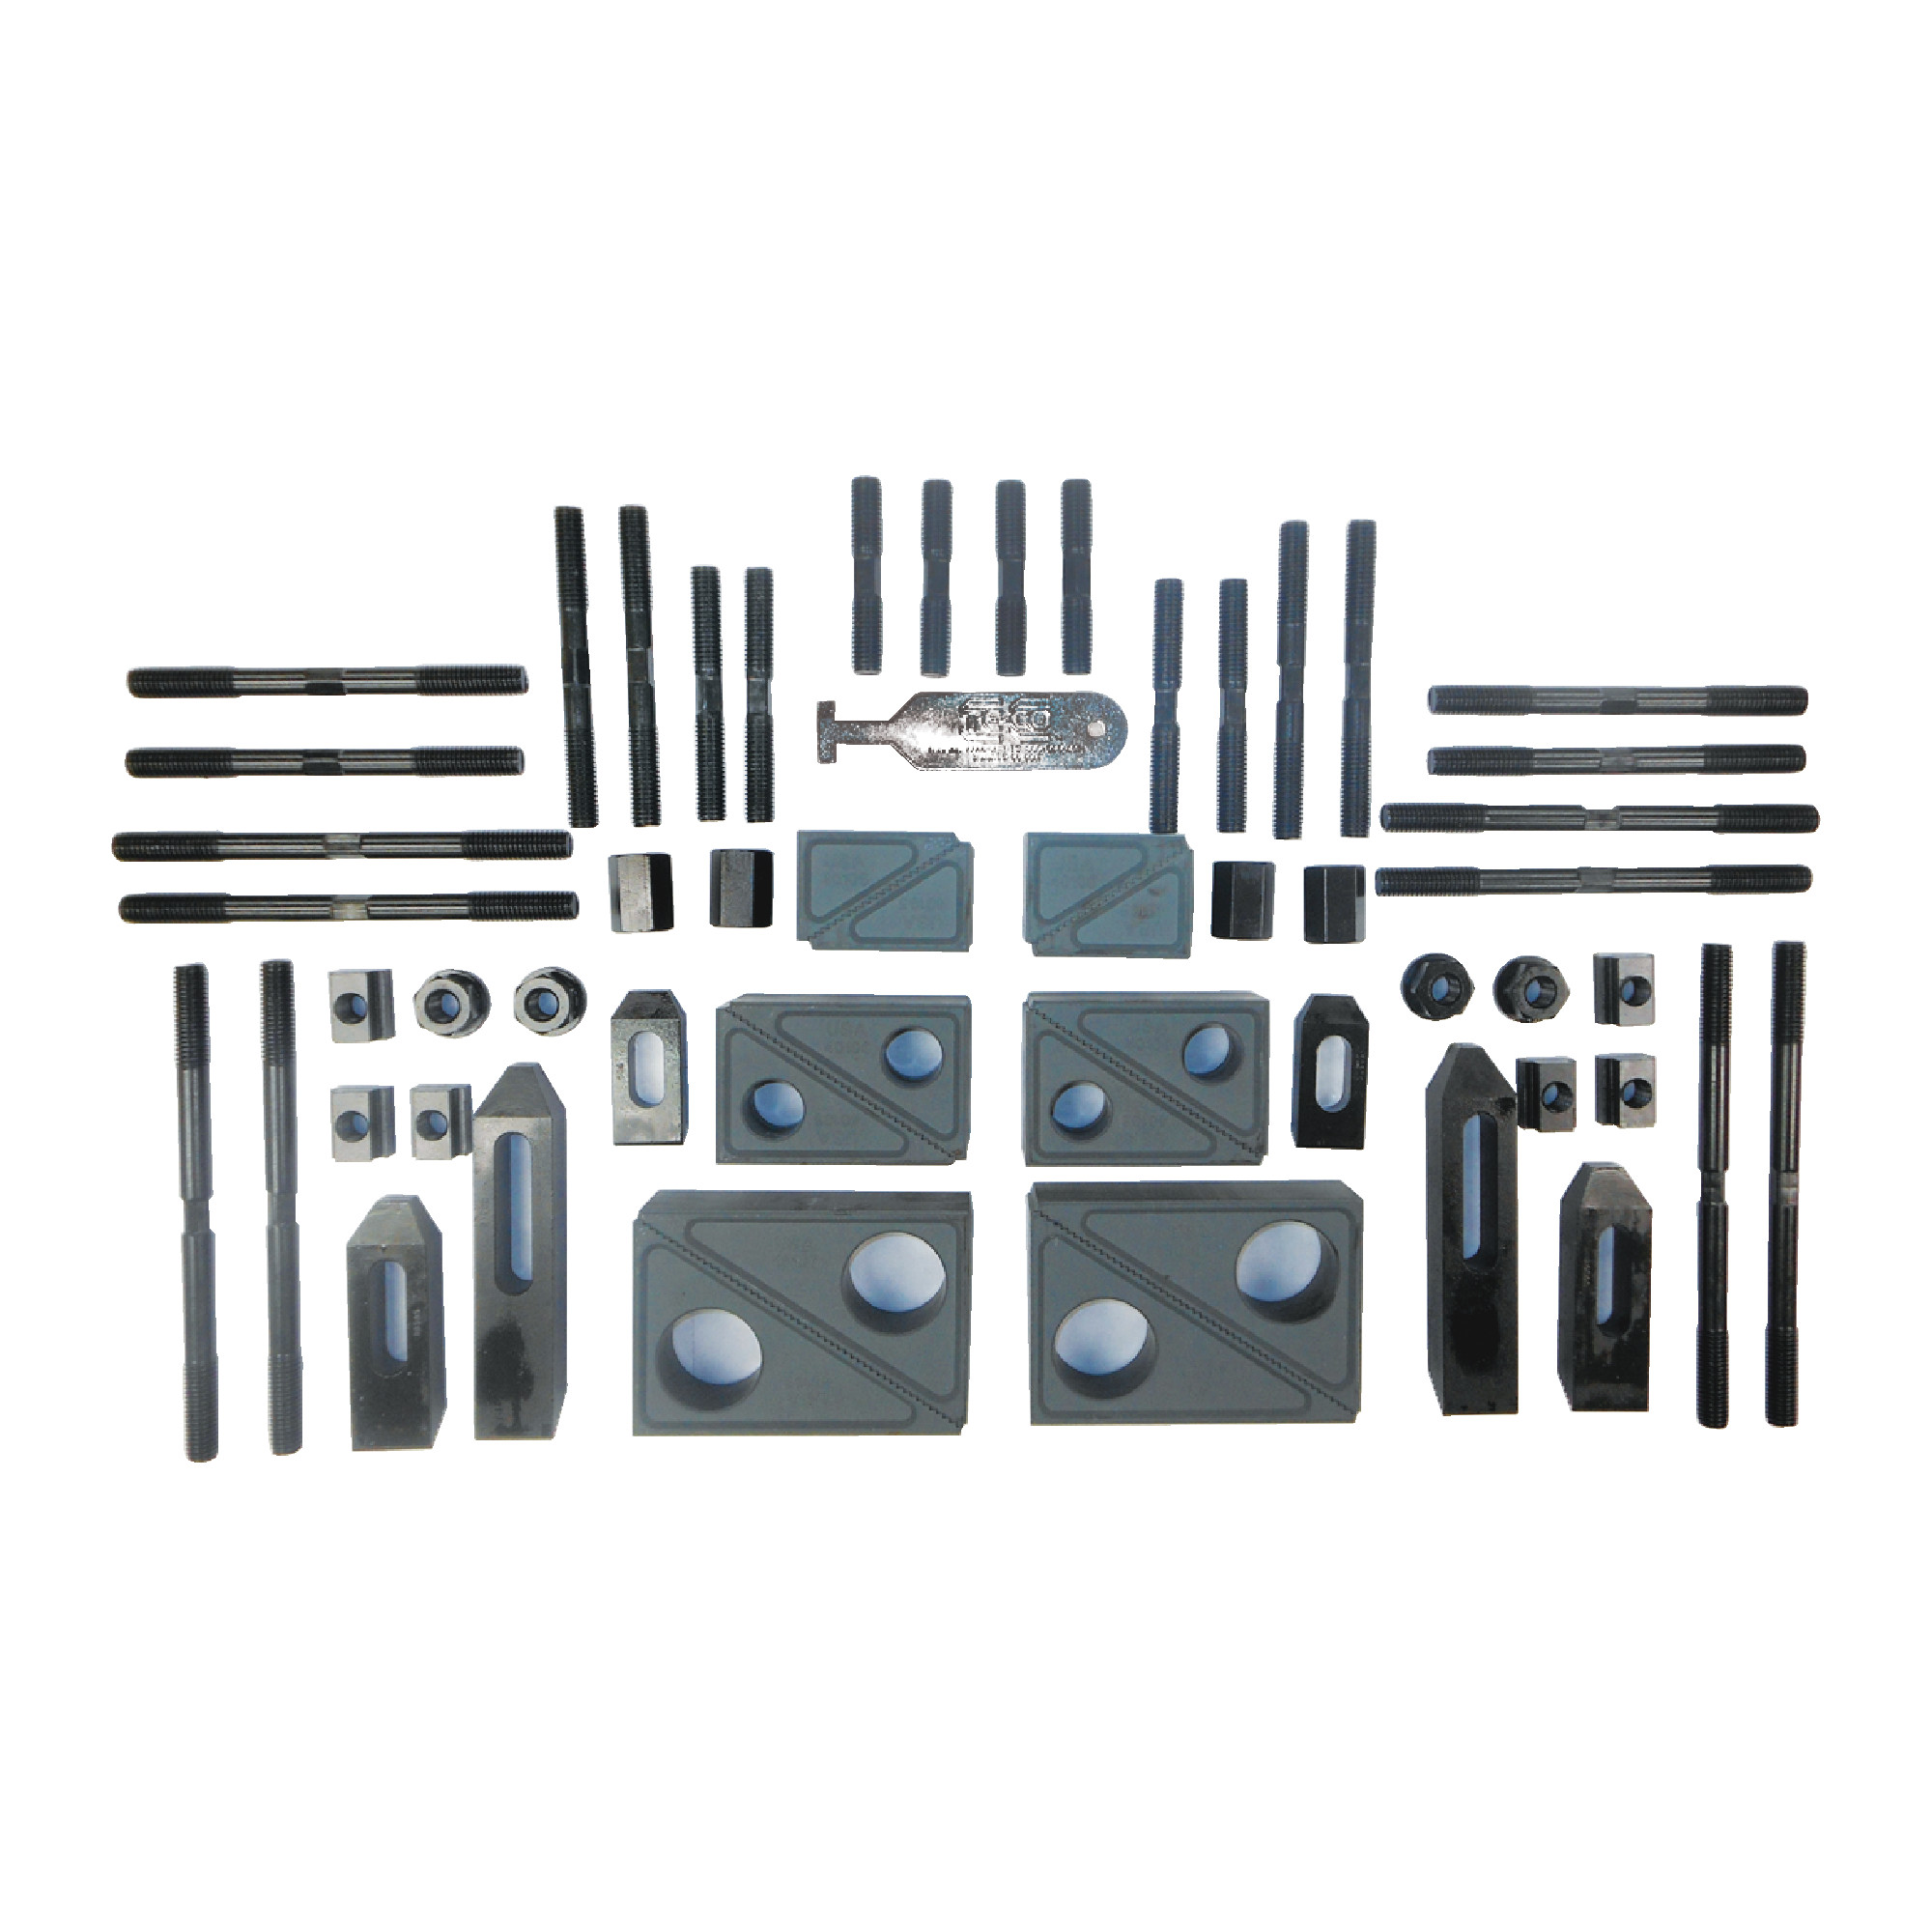 52 Piece Deluxe Clamping Set